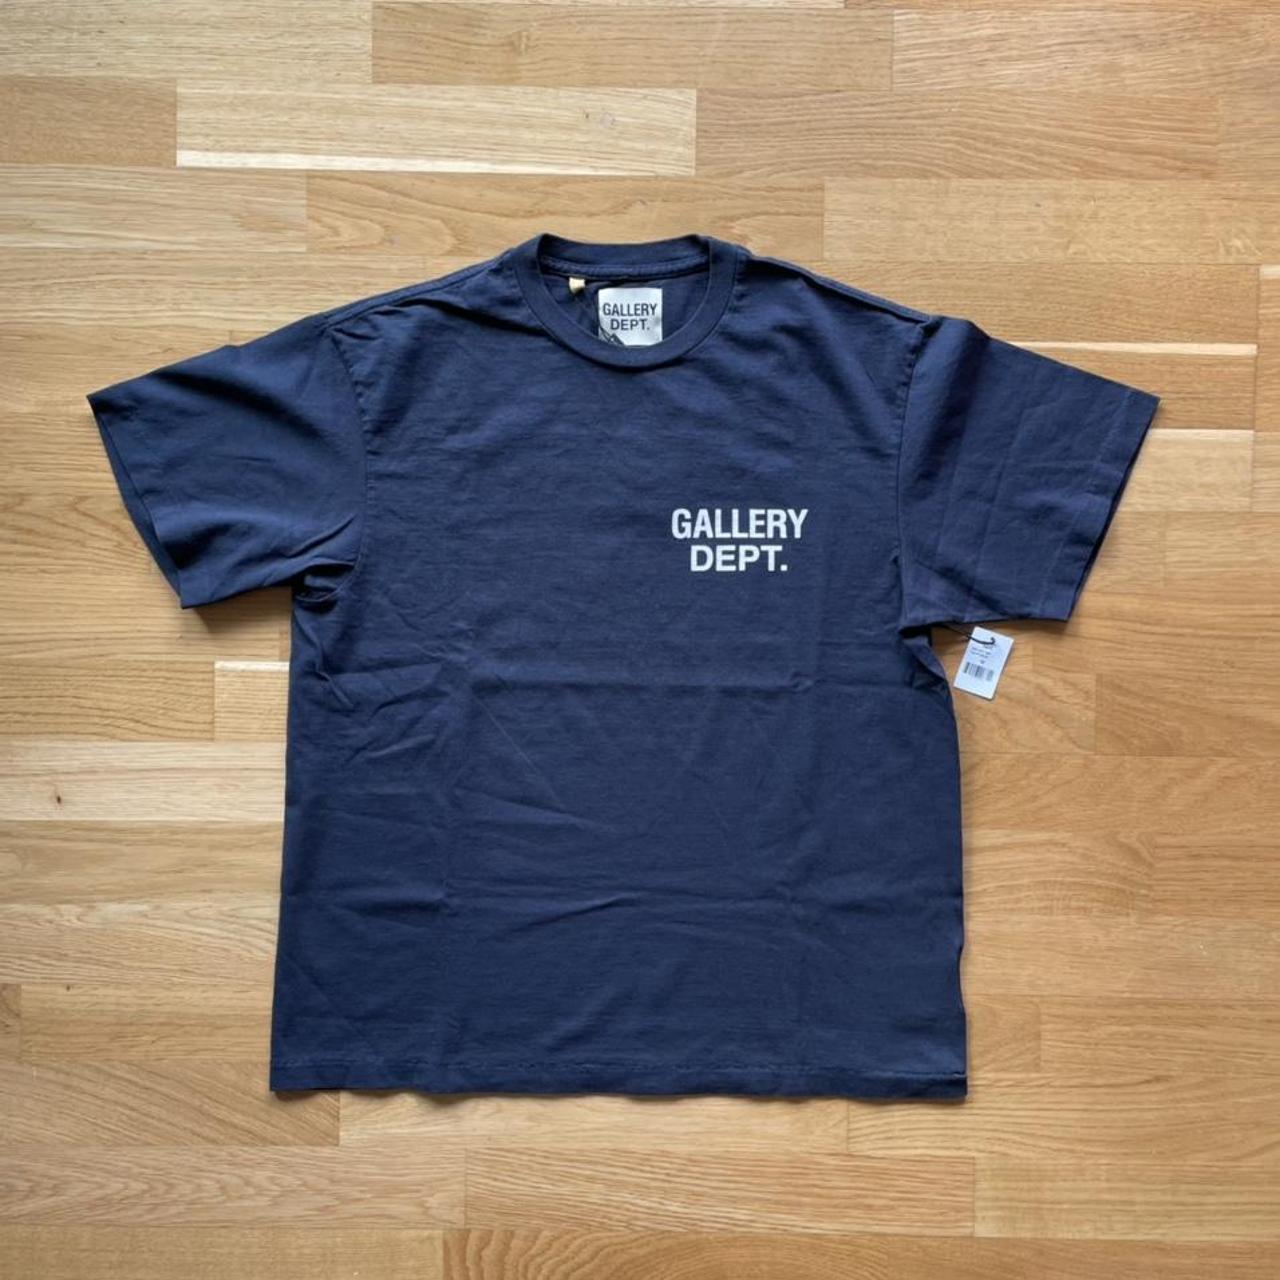 Gallery Dept. Men's Navy and White T-shirt (3)